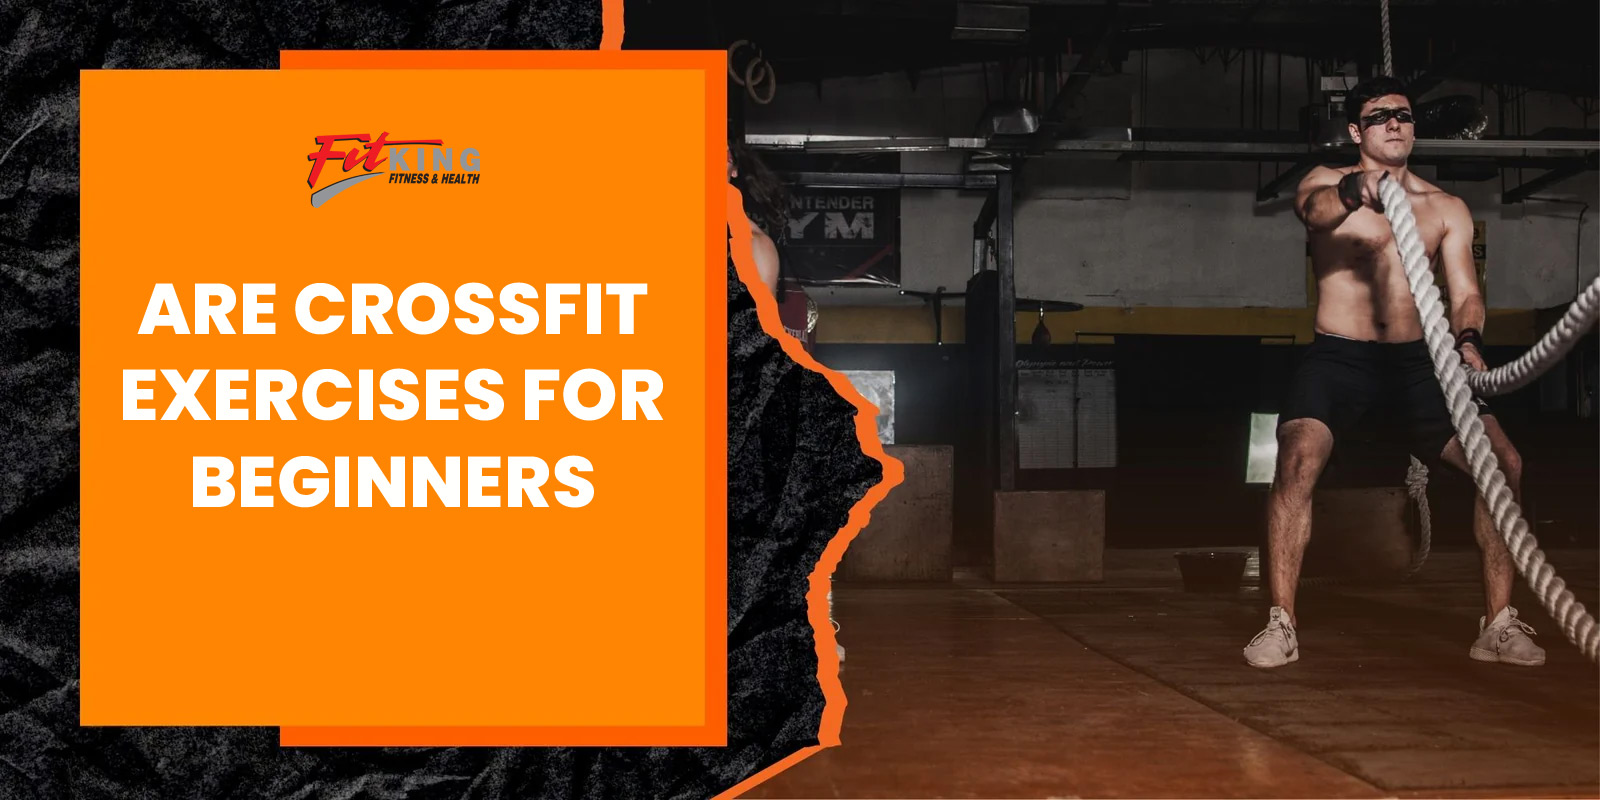 Are CrossFit exercises for beginners